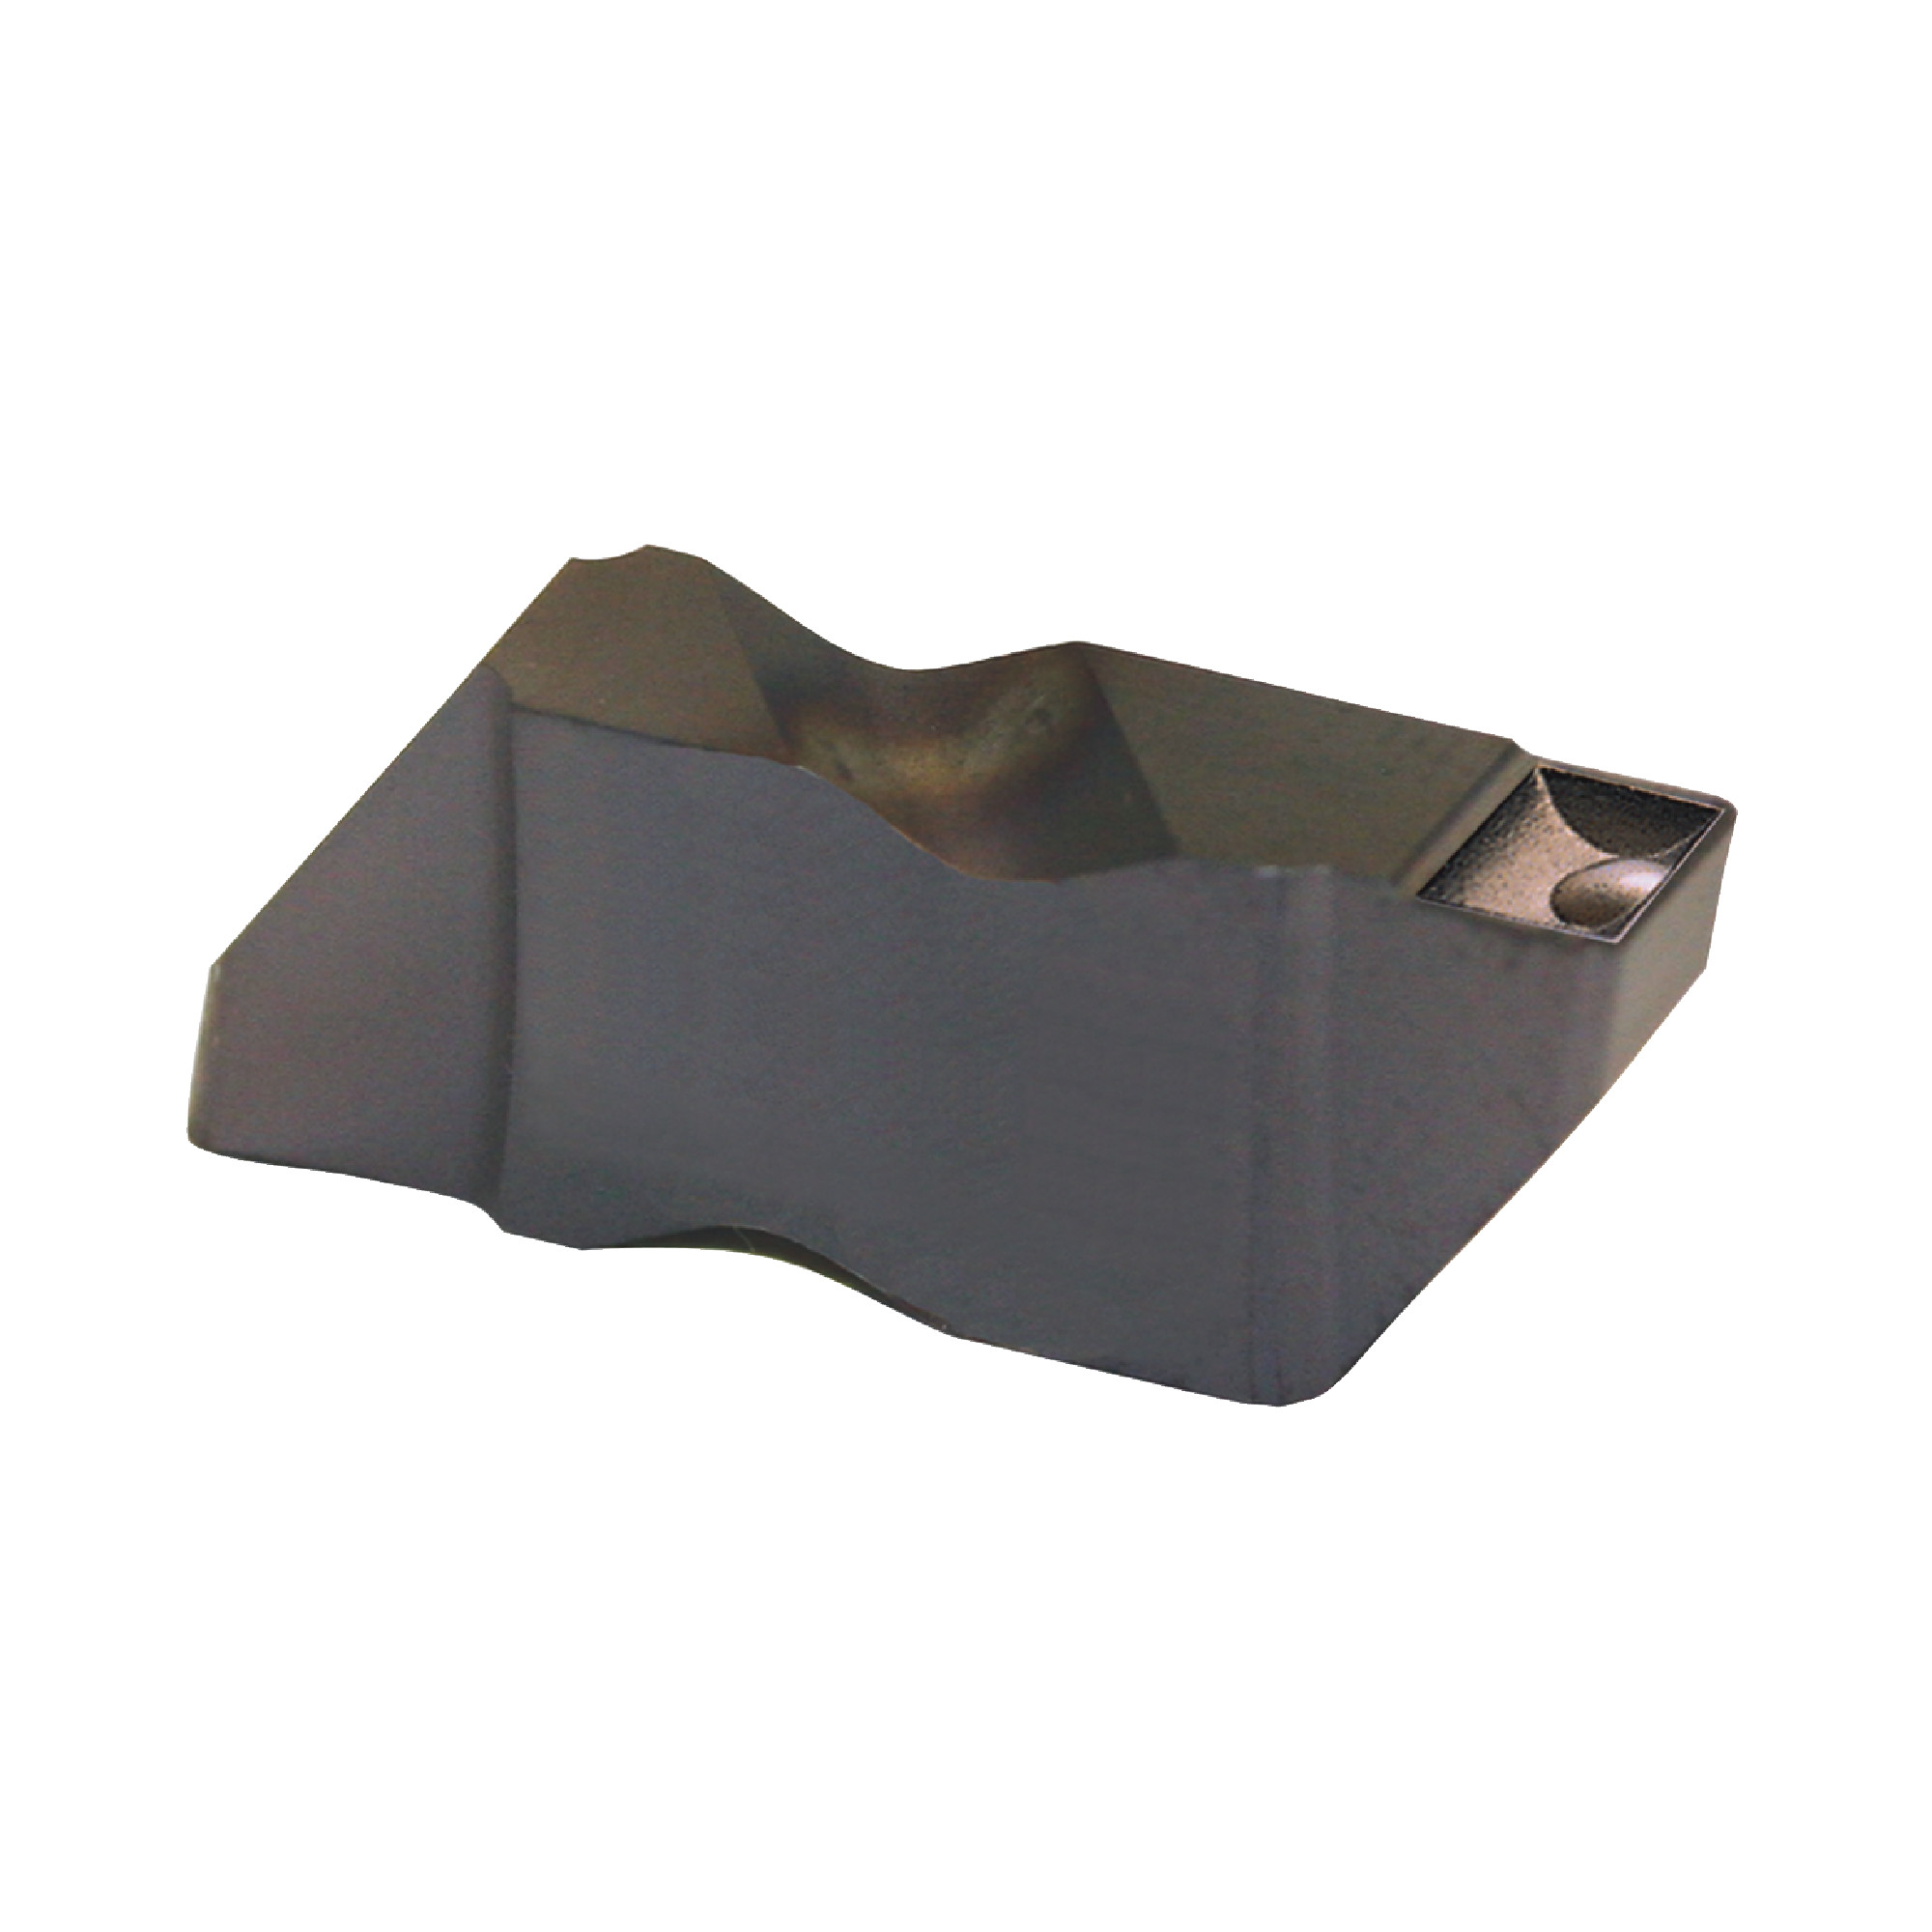 TOOL-FLO - FLG-3031R-CB AC3R / Top Clamp Indexable Carbide Insert with chip breaker/ 0.031" Cutting Width / Right Hand